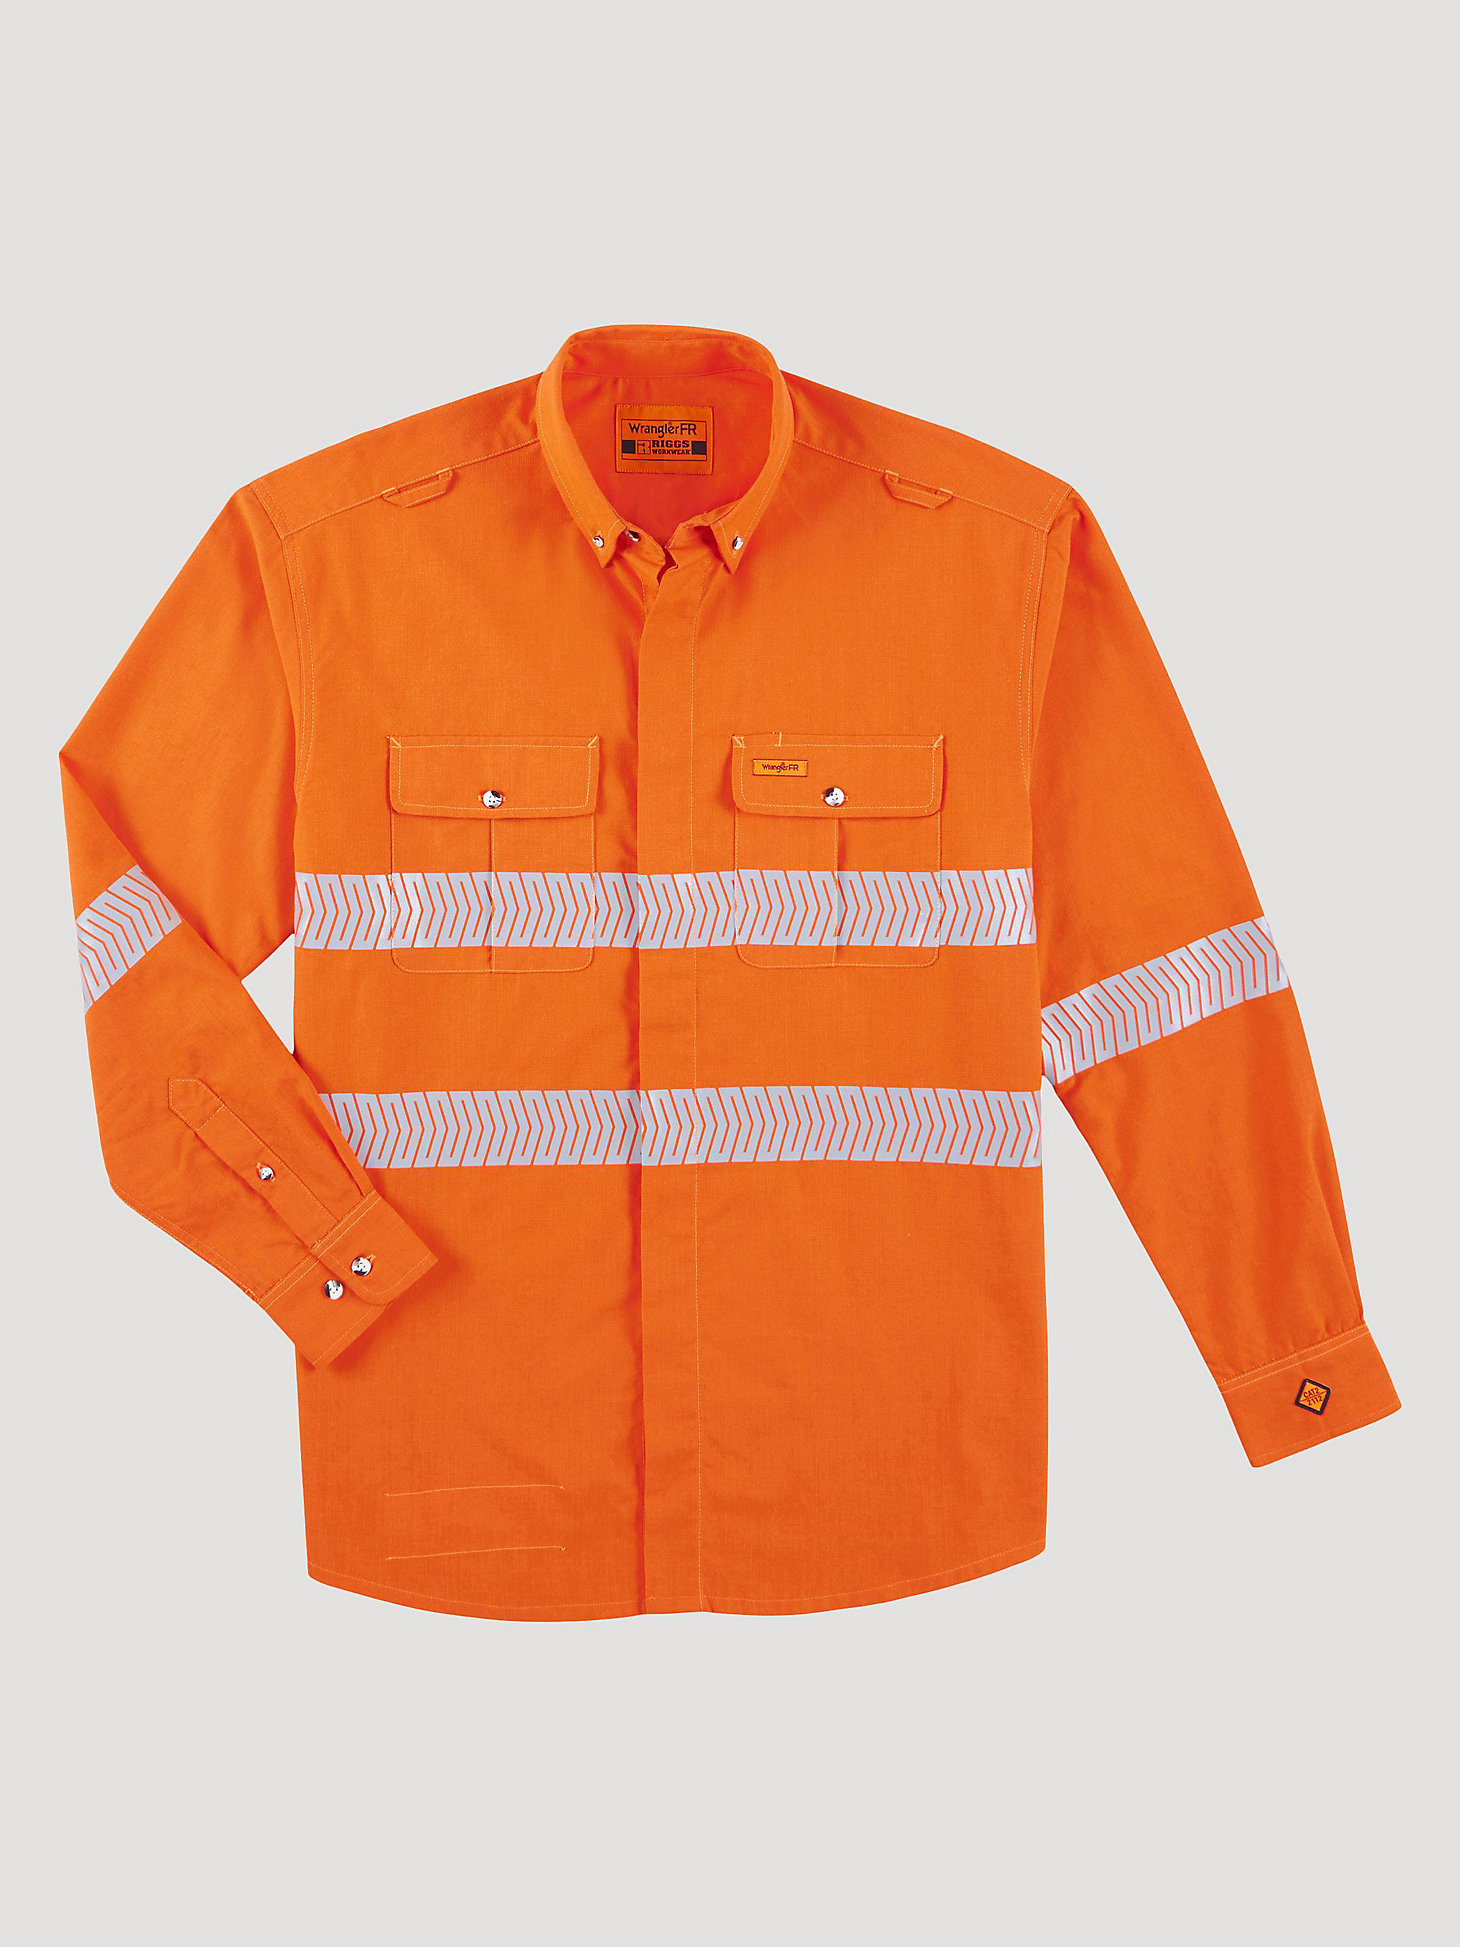 FR Flame Resistant High Visibility Work Shirt in Safety Orange alternative view 5